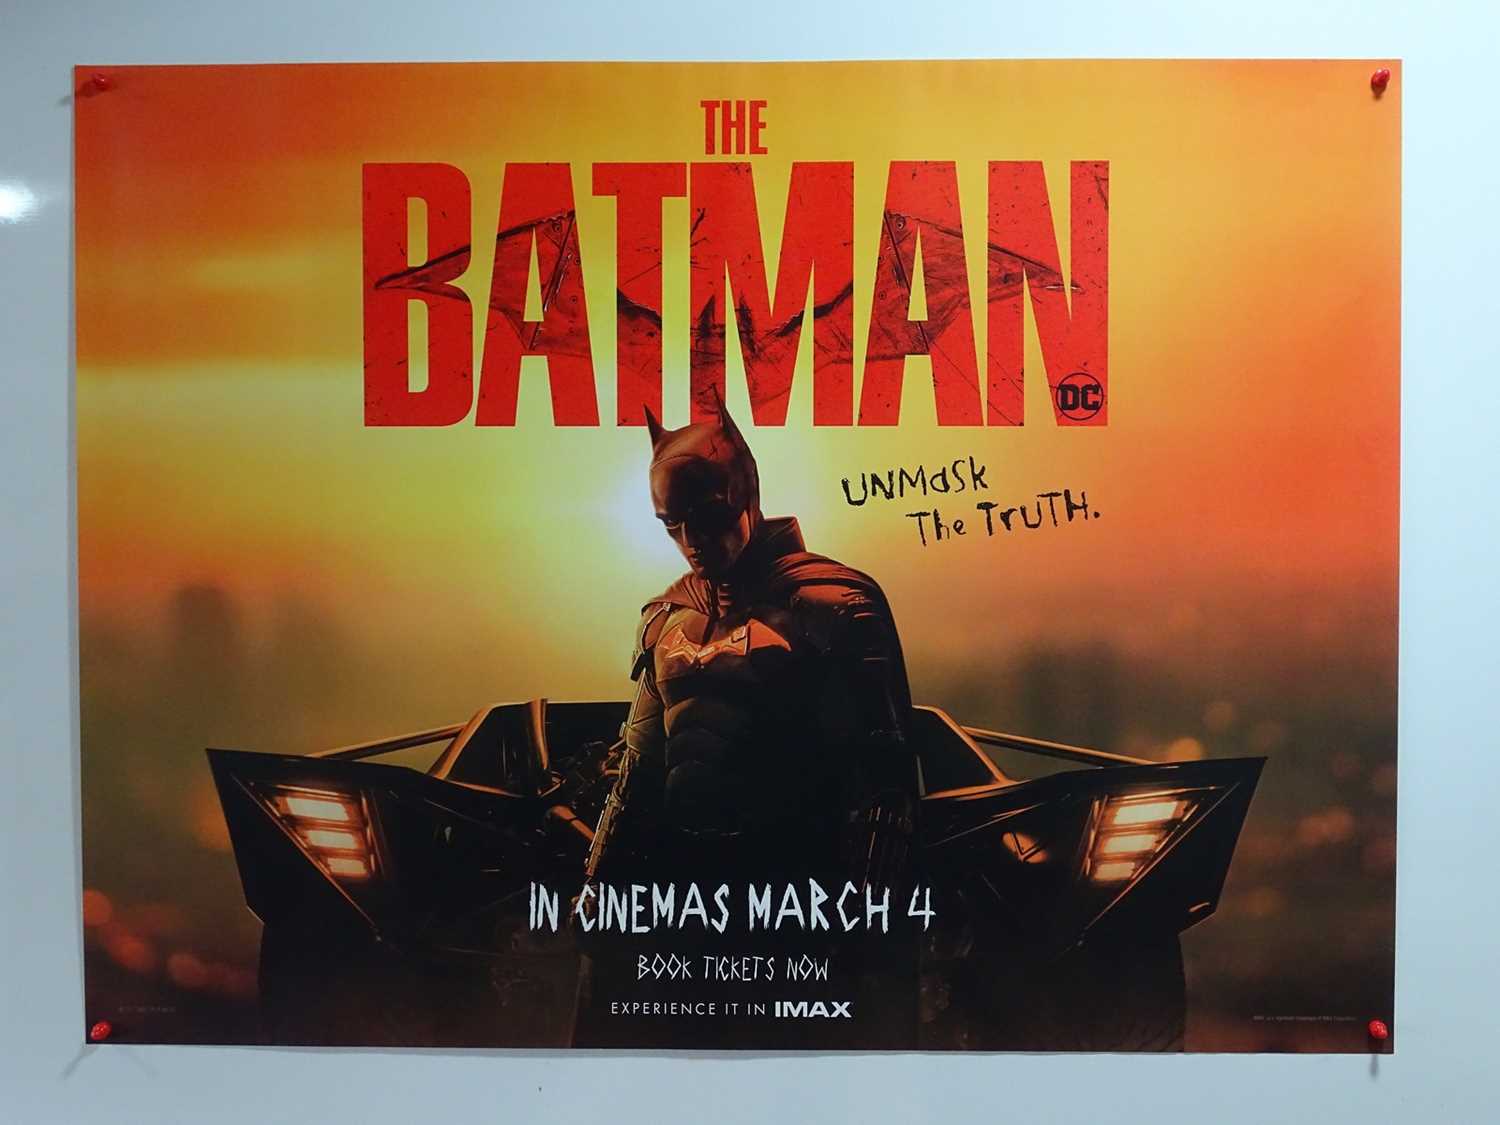 THE BATMAN (2022) - A UK Quad film poster featuring Robert Pattinson's Batman and 'Unmask The Truth'